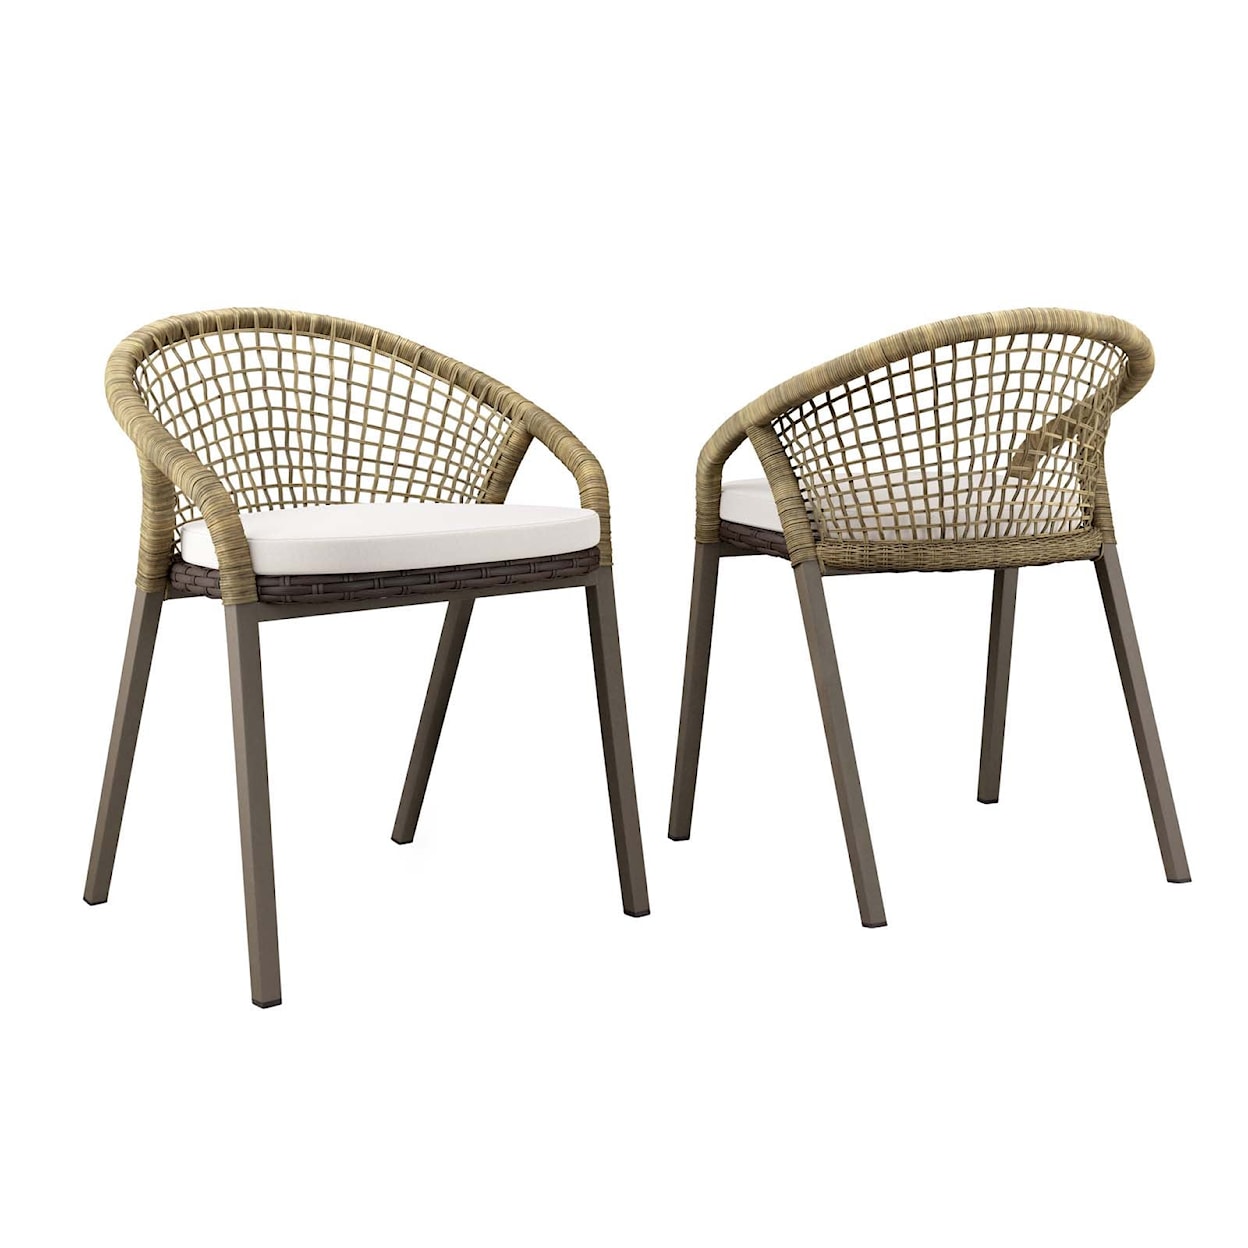 Modway Meadow Meadow Outdoor Patio Dining Chairs Set of 2